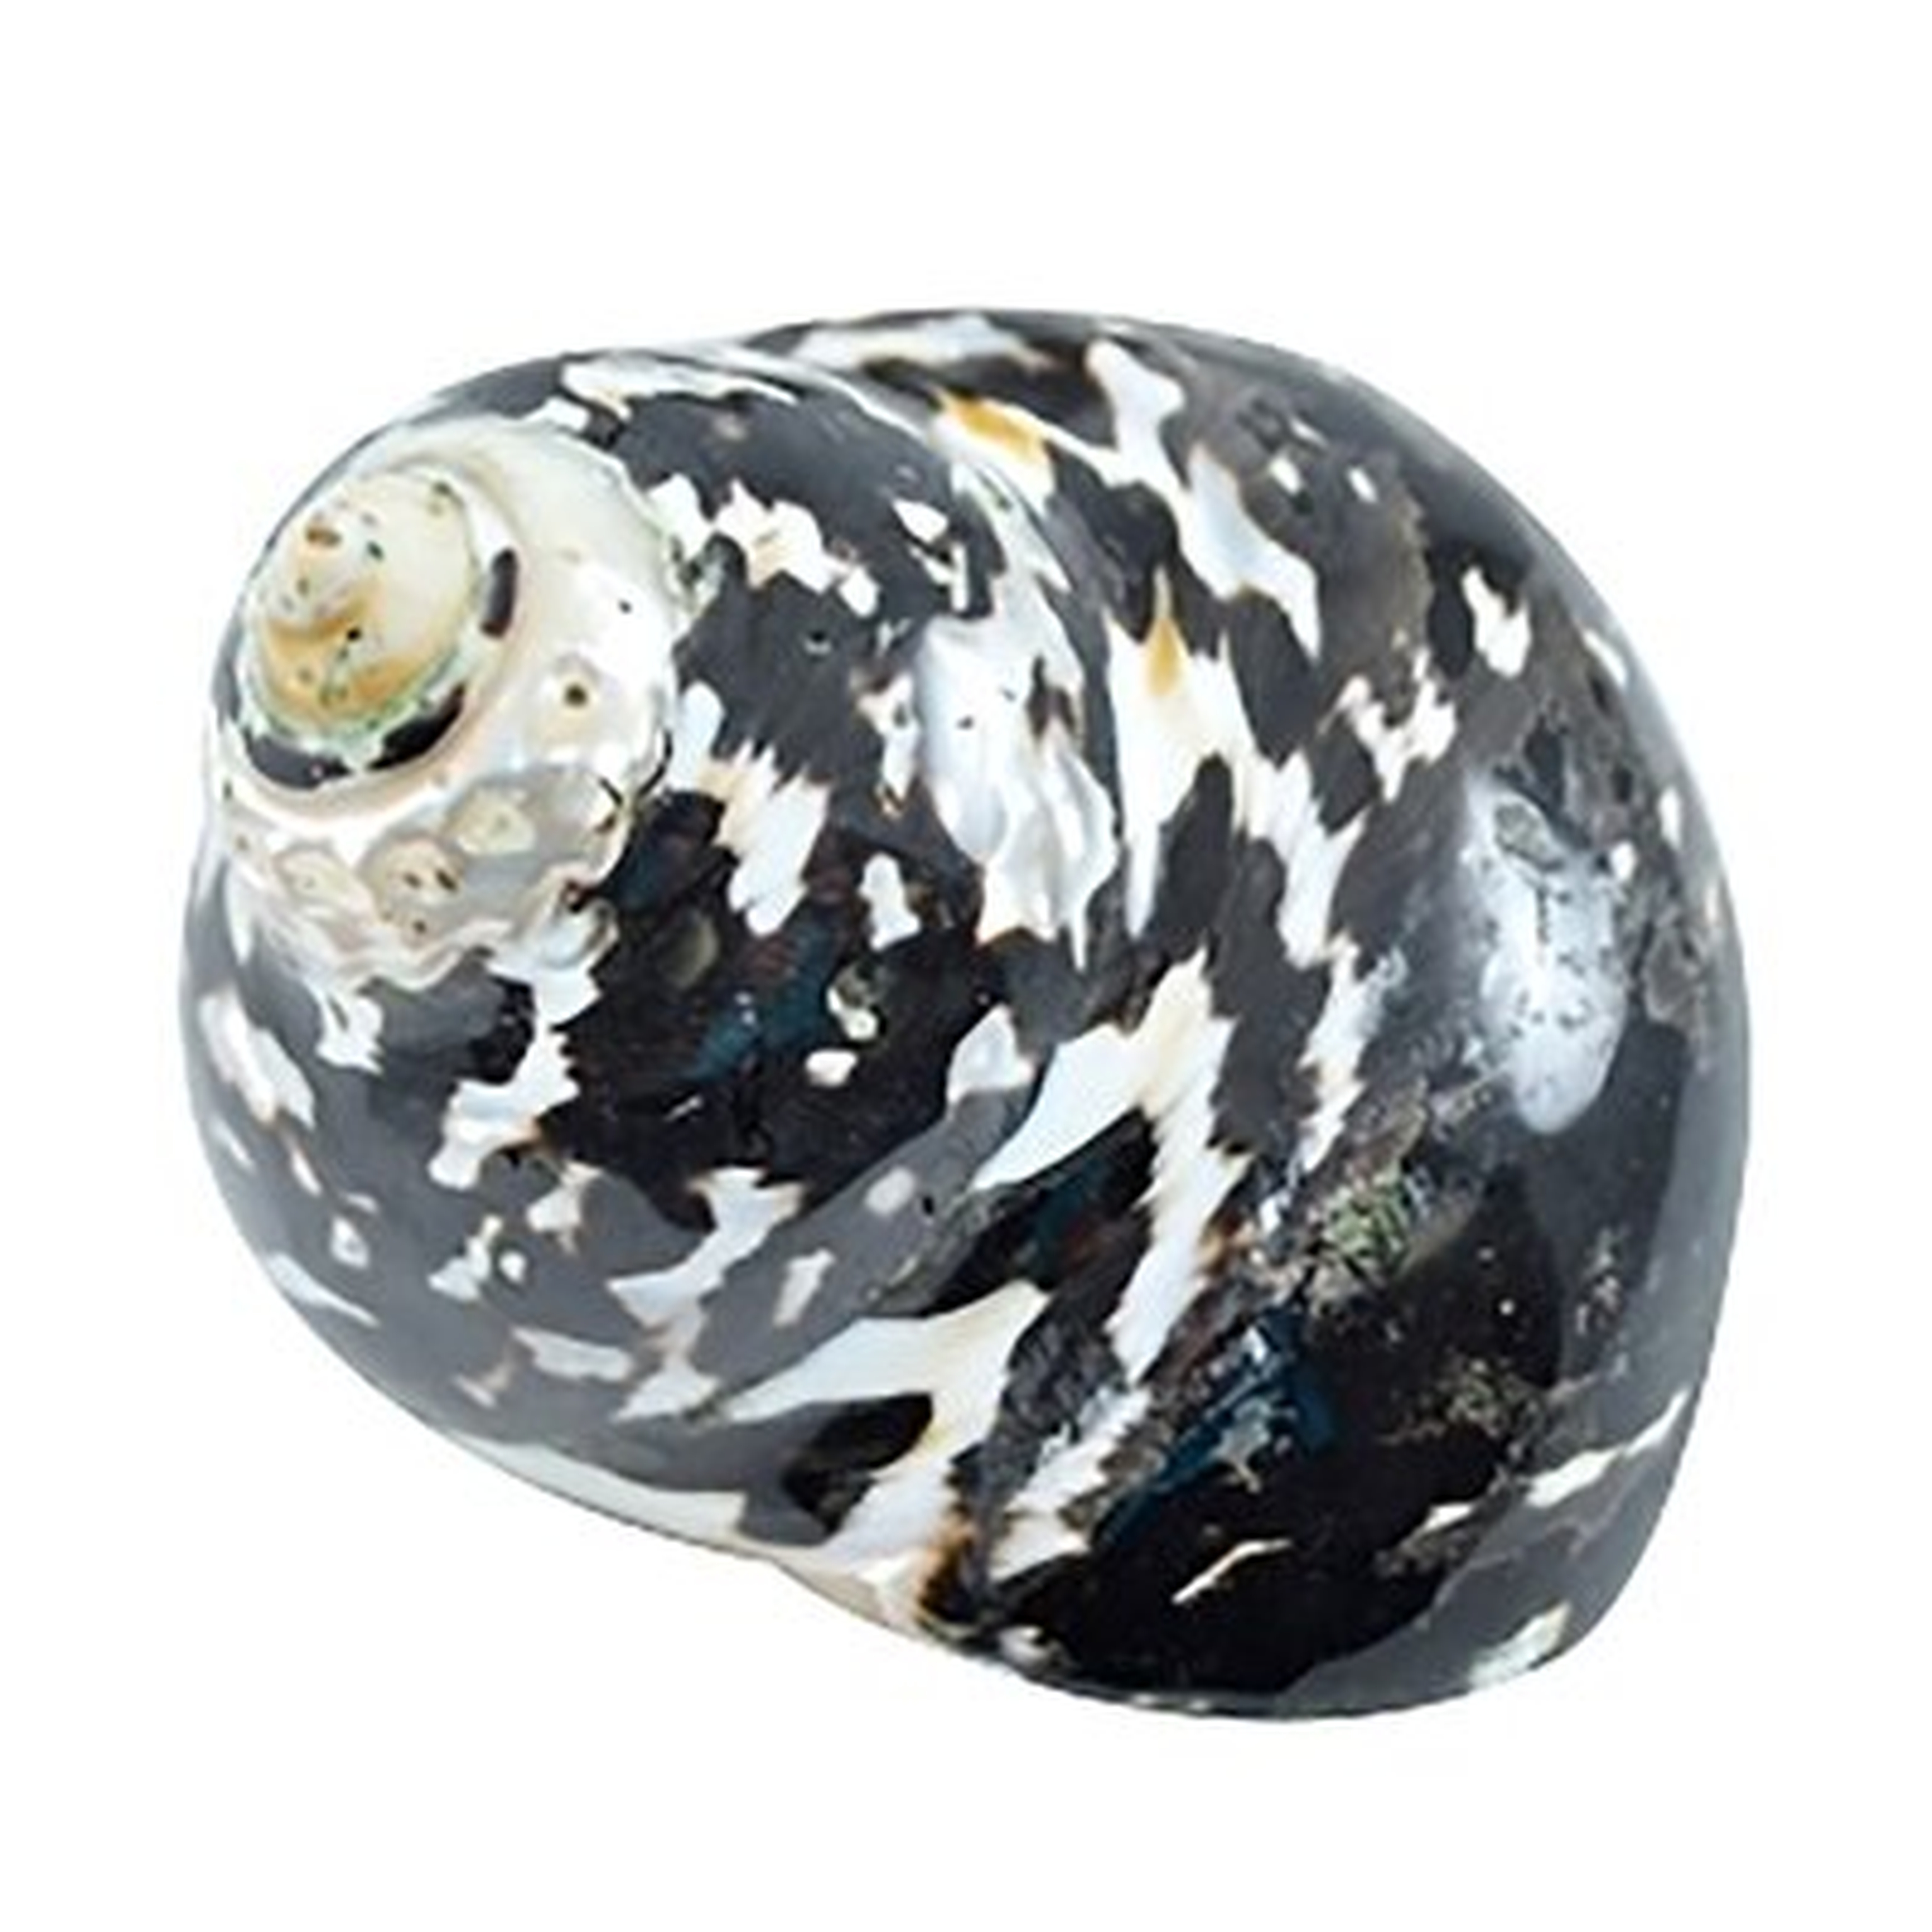 Stoudt Magpie Polished Shell - Wayfair